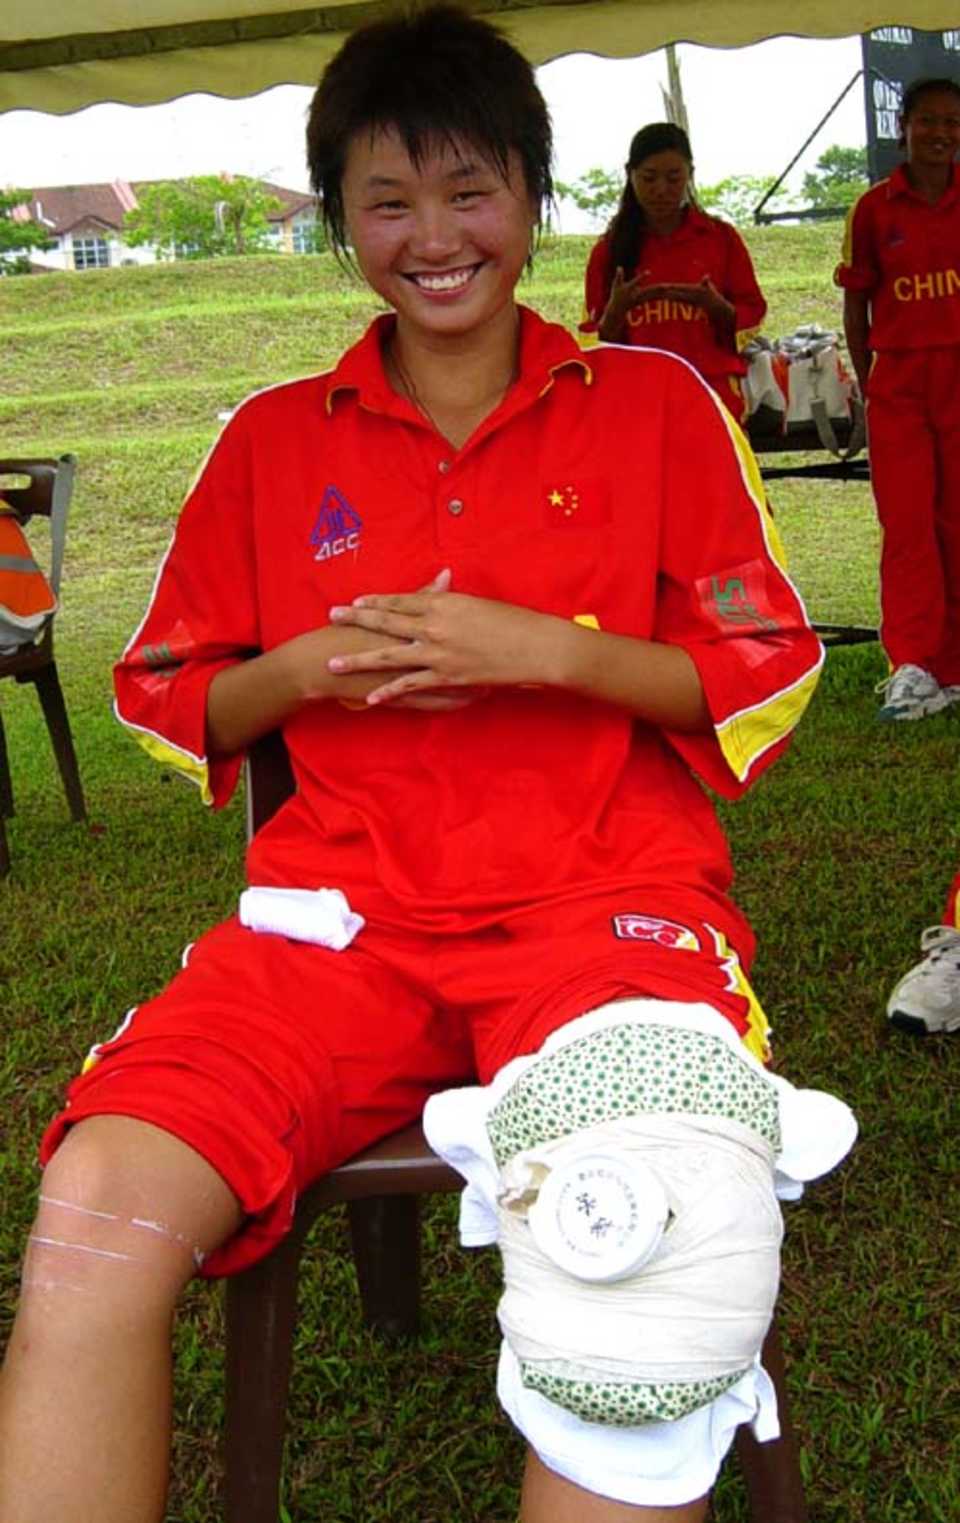 Playing with a strained ligament, Hu Ting Ting added 31 runs with Duan Qiong to take China to a seven-wicket victory over UAE